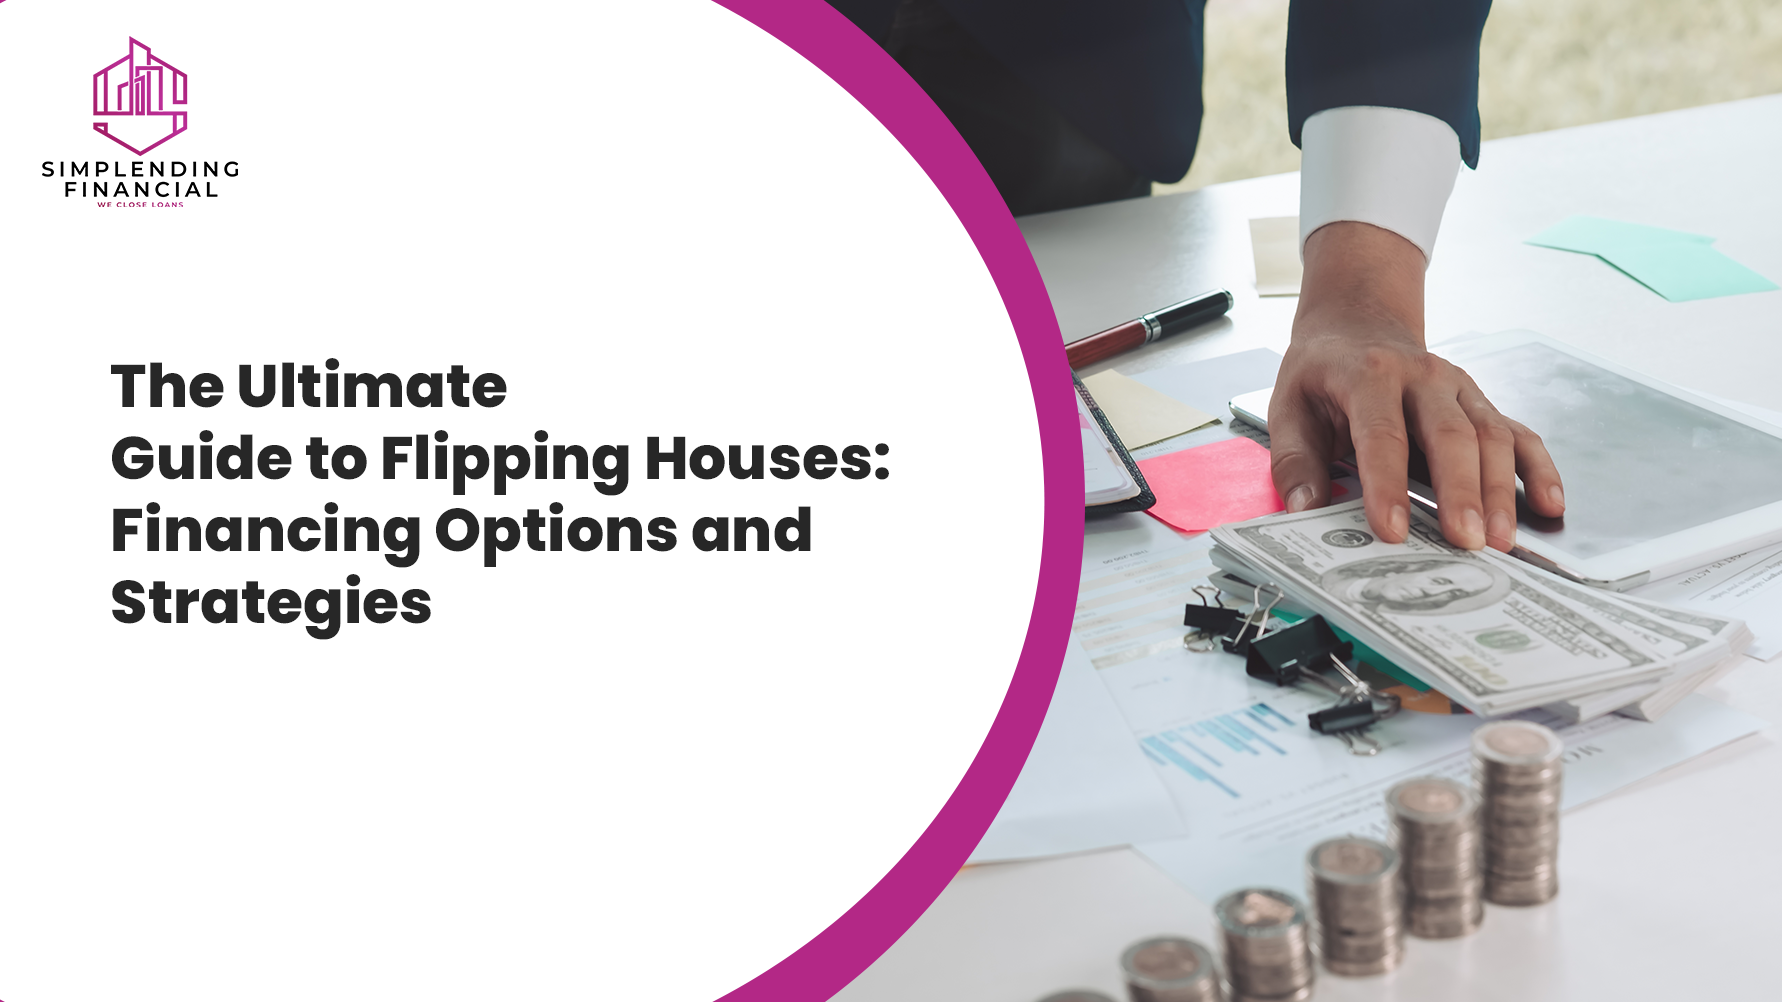 The Ultimate Guide to Flipping Houses: Financing Options and Strategies